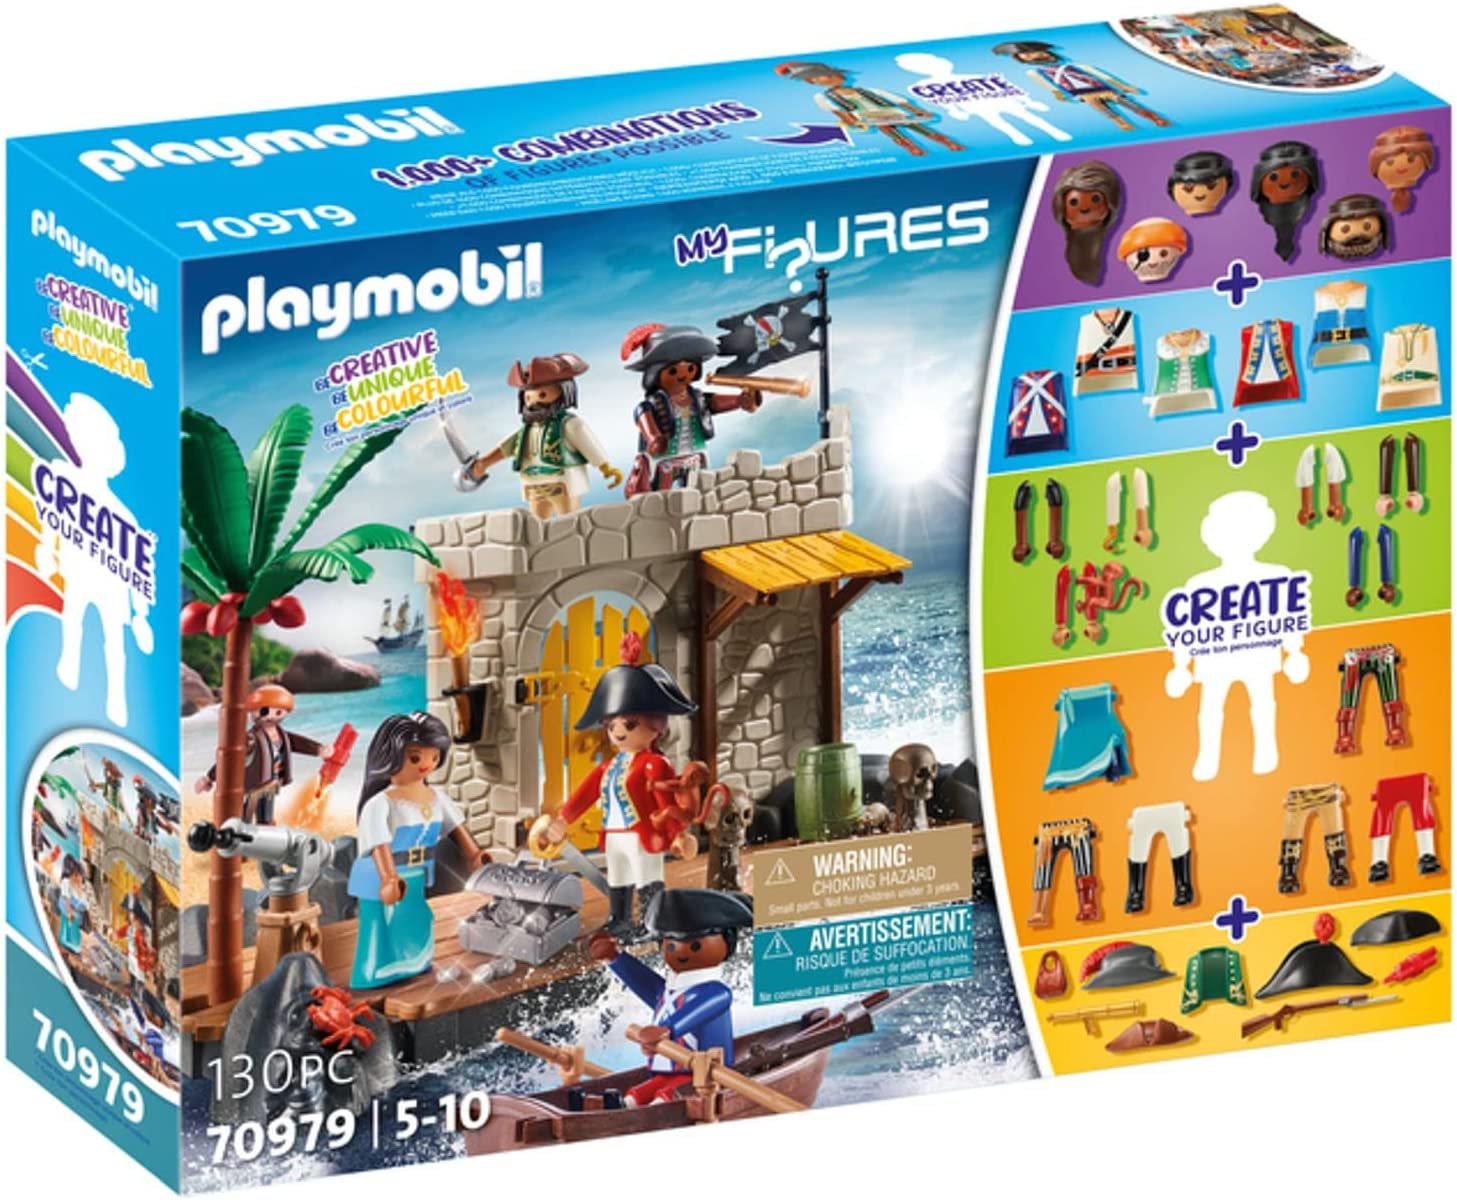 PLAYMOBIL My Figures 70979 Island of The Pirates, 6 Toy Figures with Over 1000 Combination Possibilities, Pirate Toy for Children from 5 Years